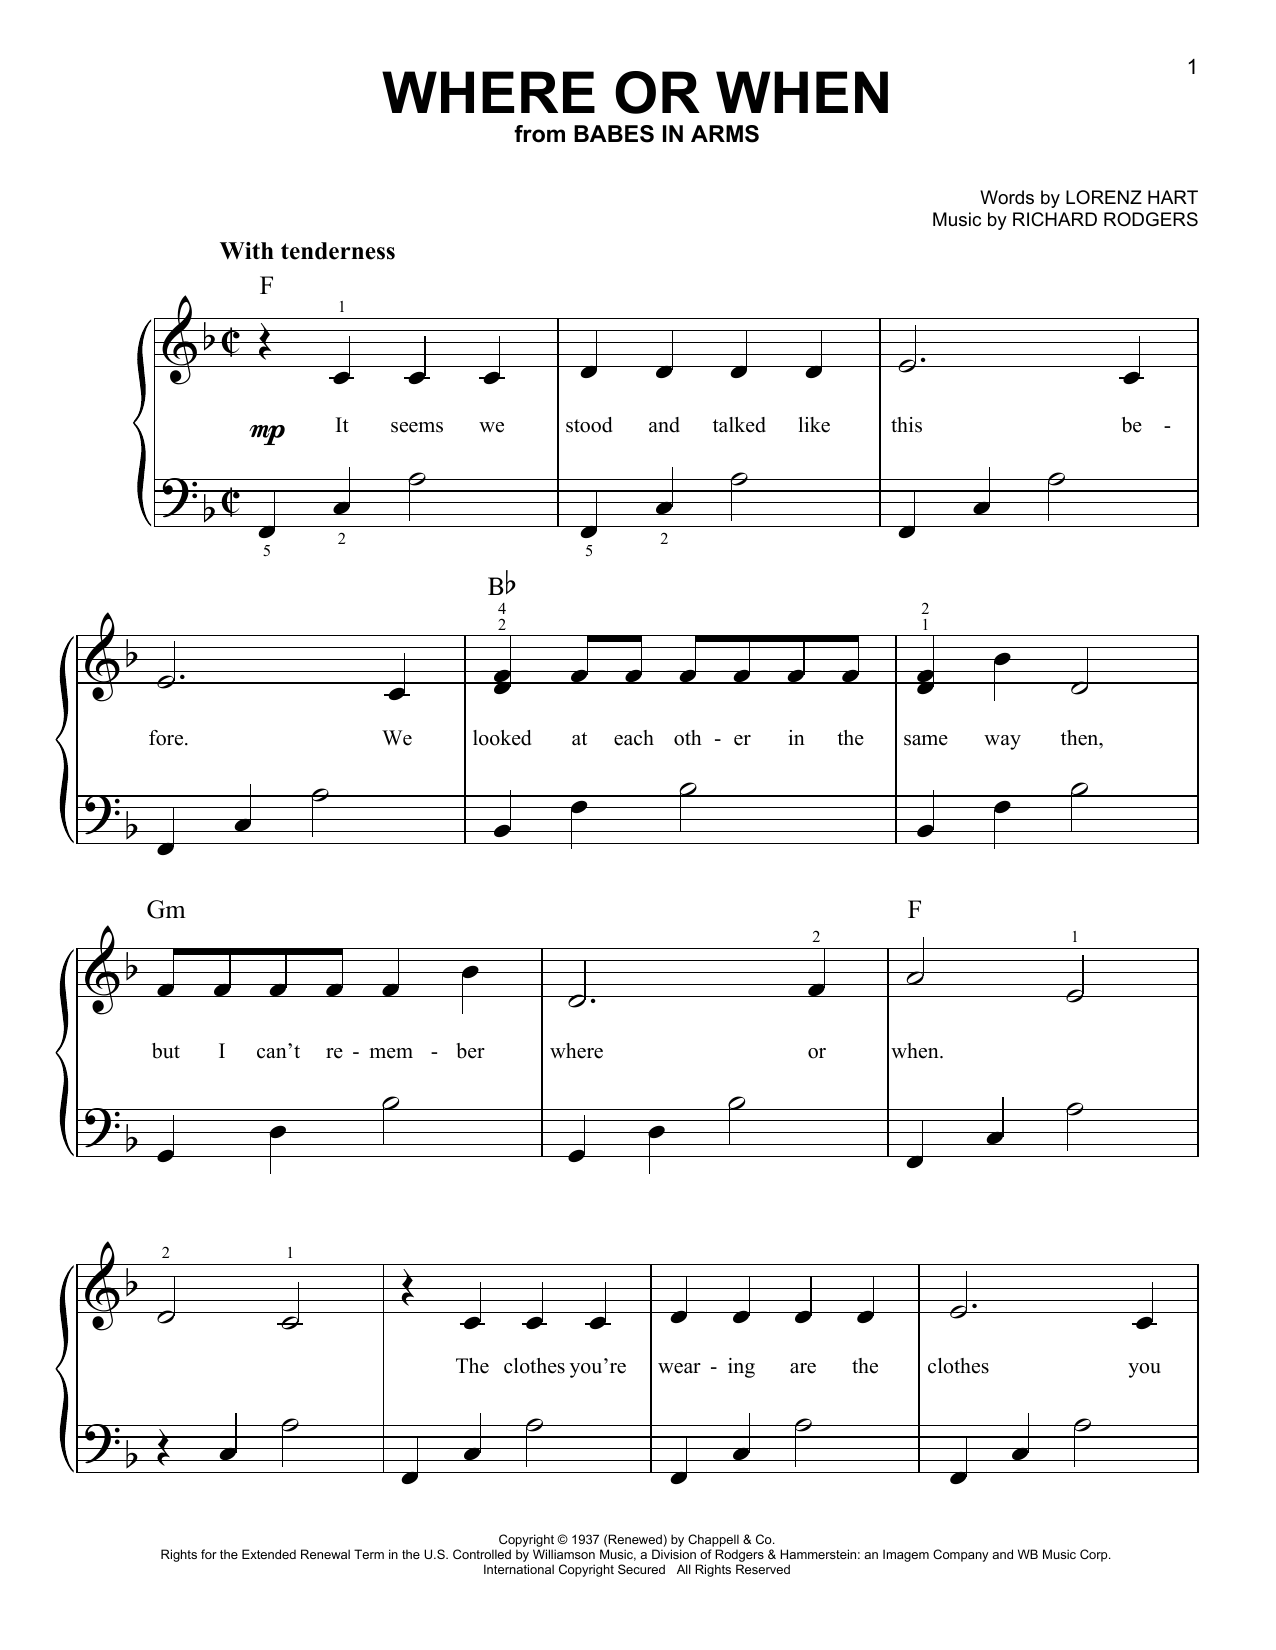 Rodgers & Hart Where Or When sheet music notes and chords. Download Printable PDF.